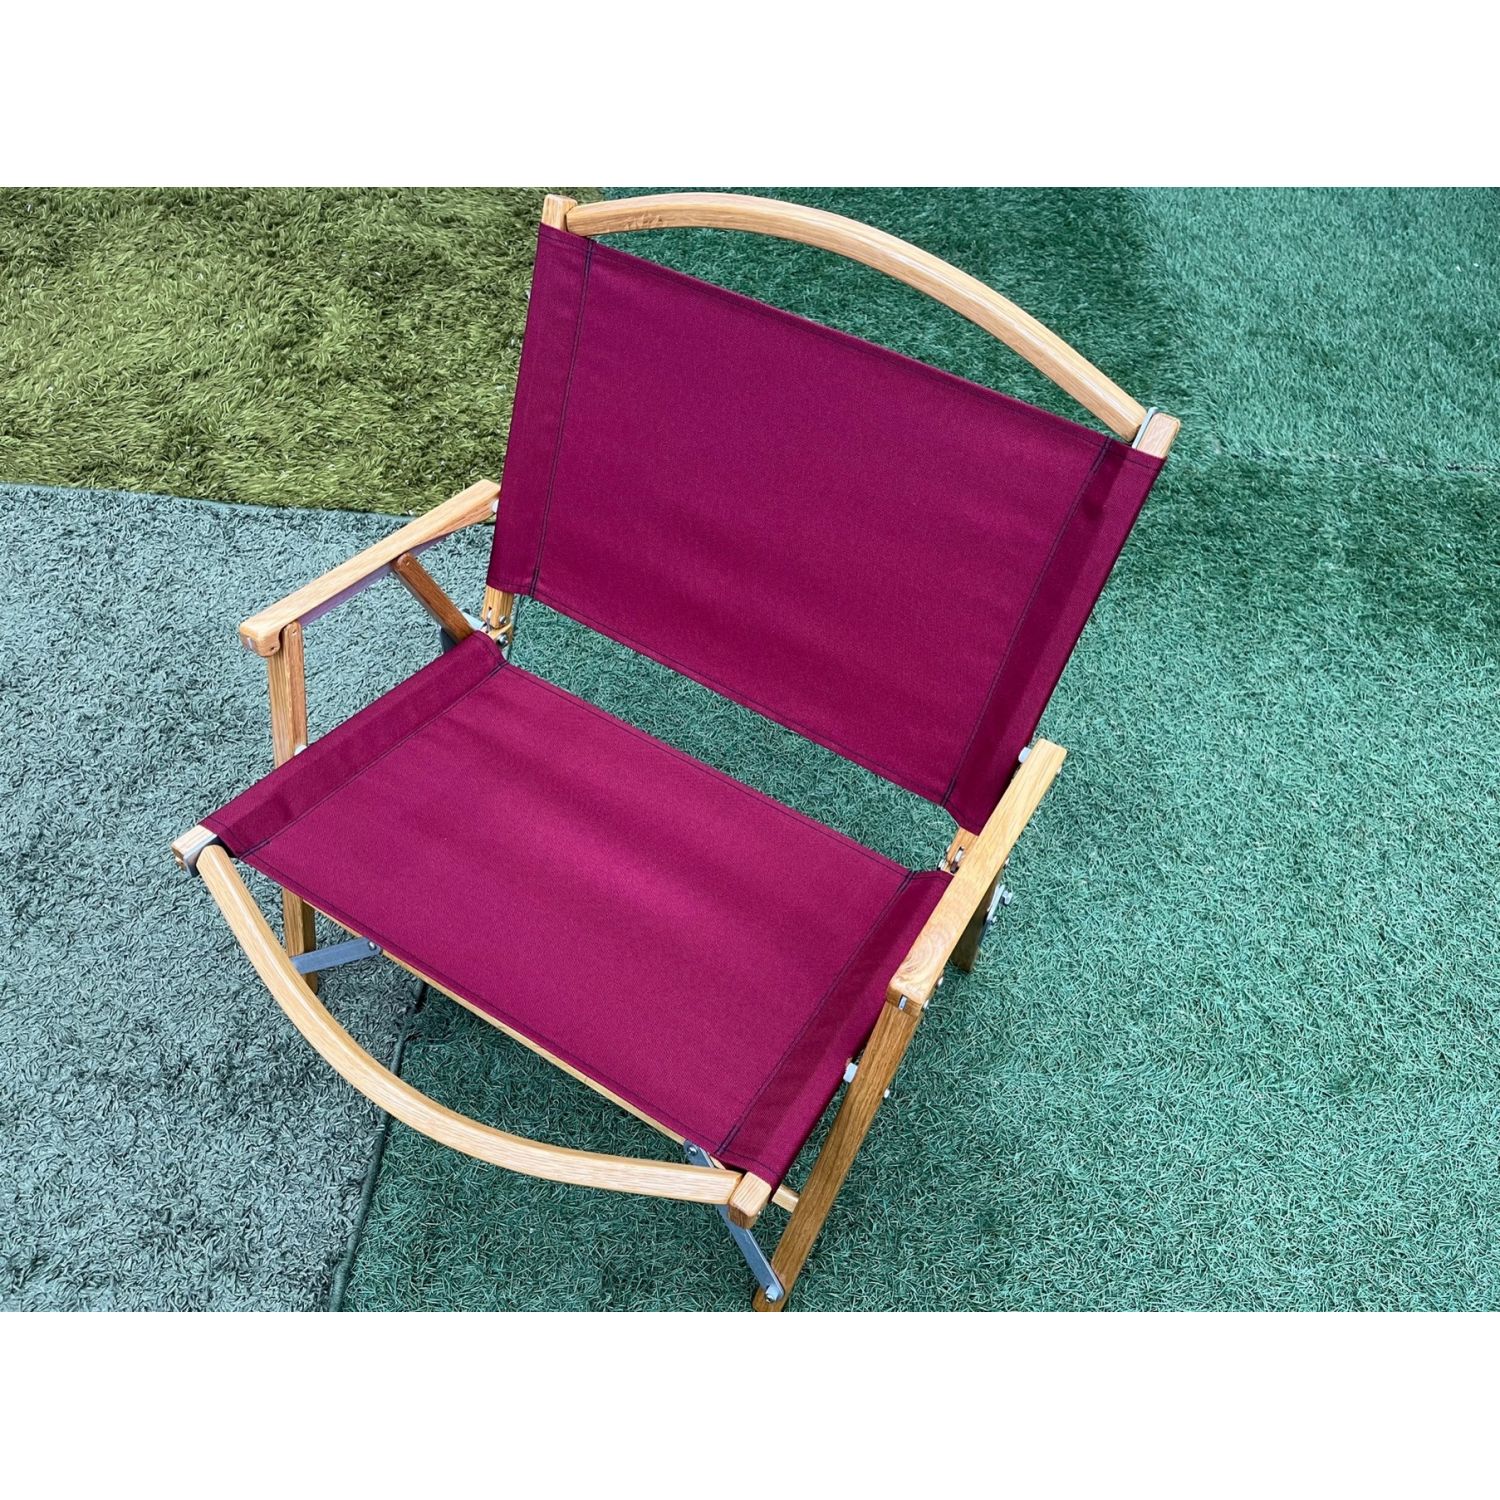 Kermit Chair Burgundy カーミットチェアカーミットチェア